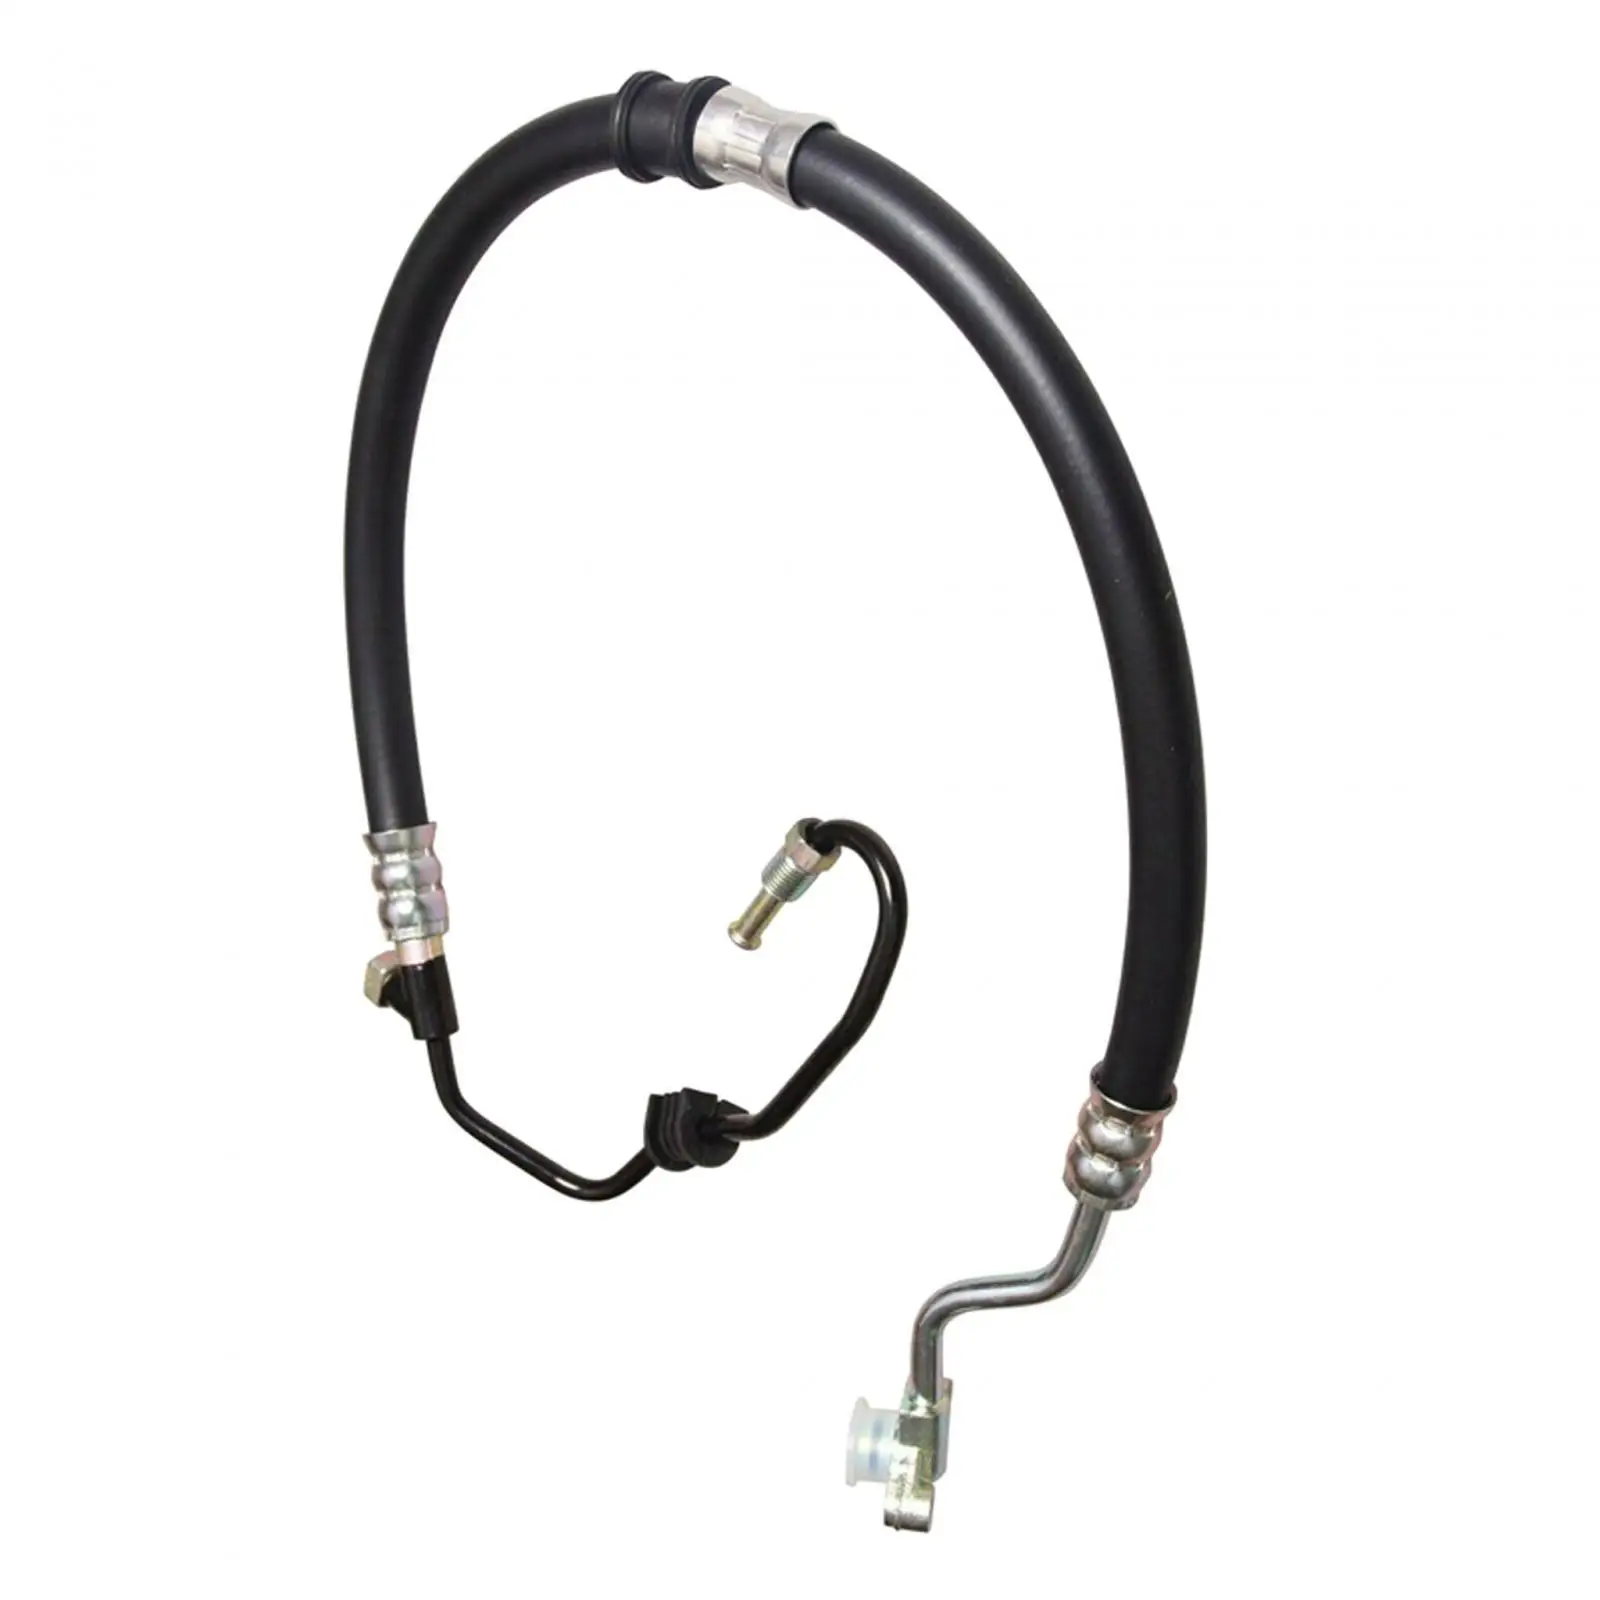 Power Steering Hose 53713-s84-a04 Durable Spare Parts Professional Replacement Accessory for Honda Accord L4 2.3L 1998-2002